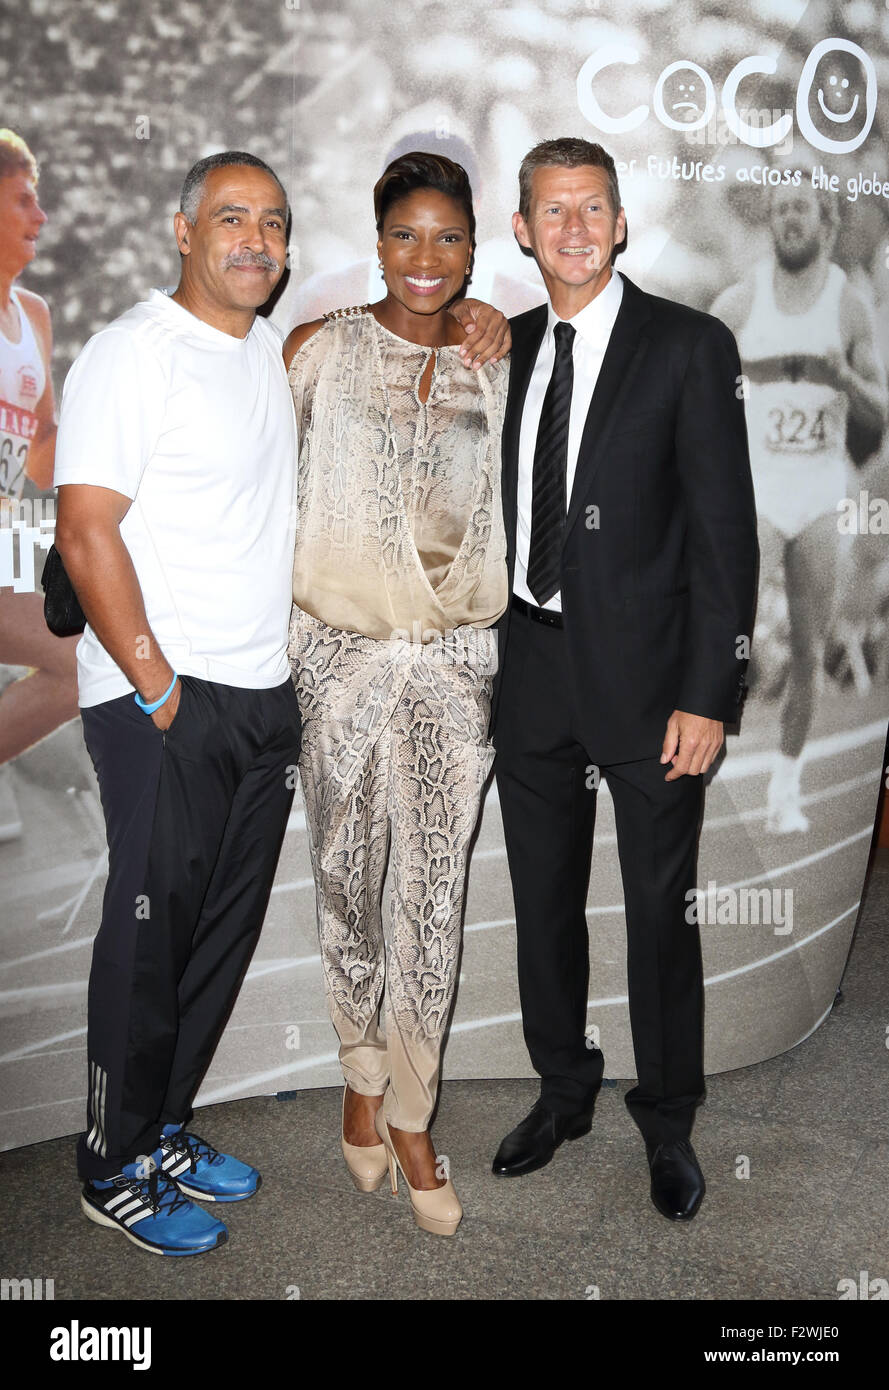 'An Audience With Daley' event in aid of the charity Coco held at the Royal Garden Hotel  Featuring: Daley Thompson, Denise Lewis, Steve Cram Where: London, United Kingdom When: 23 Jul 2015 Stock Photo